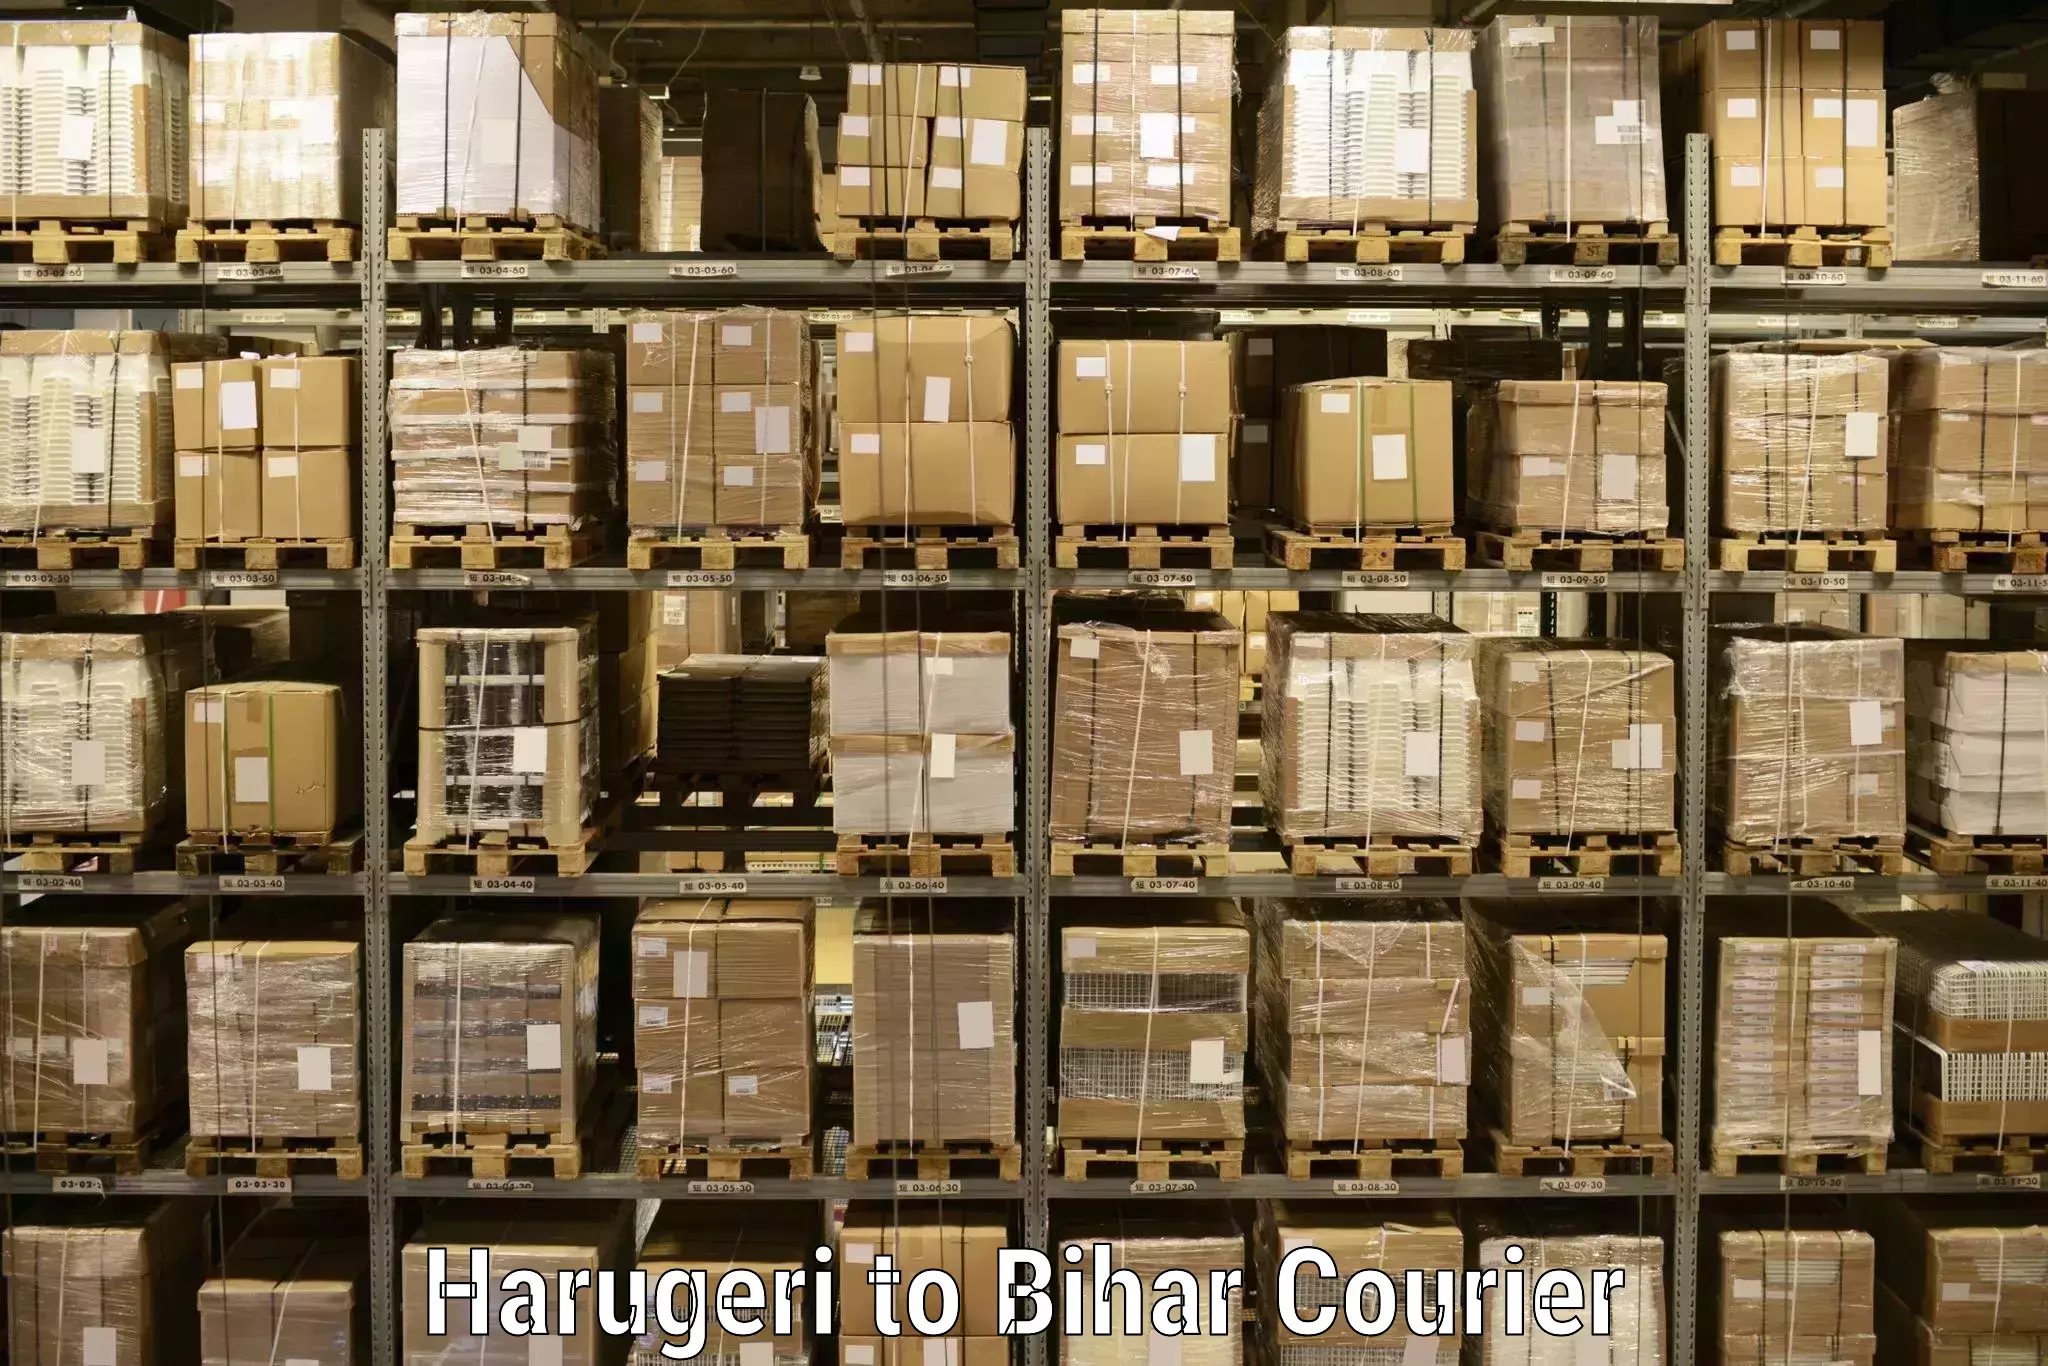 Residential courier service Harugeri to Dhaka